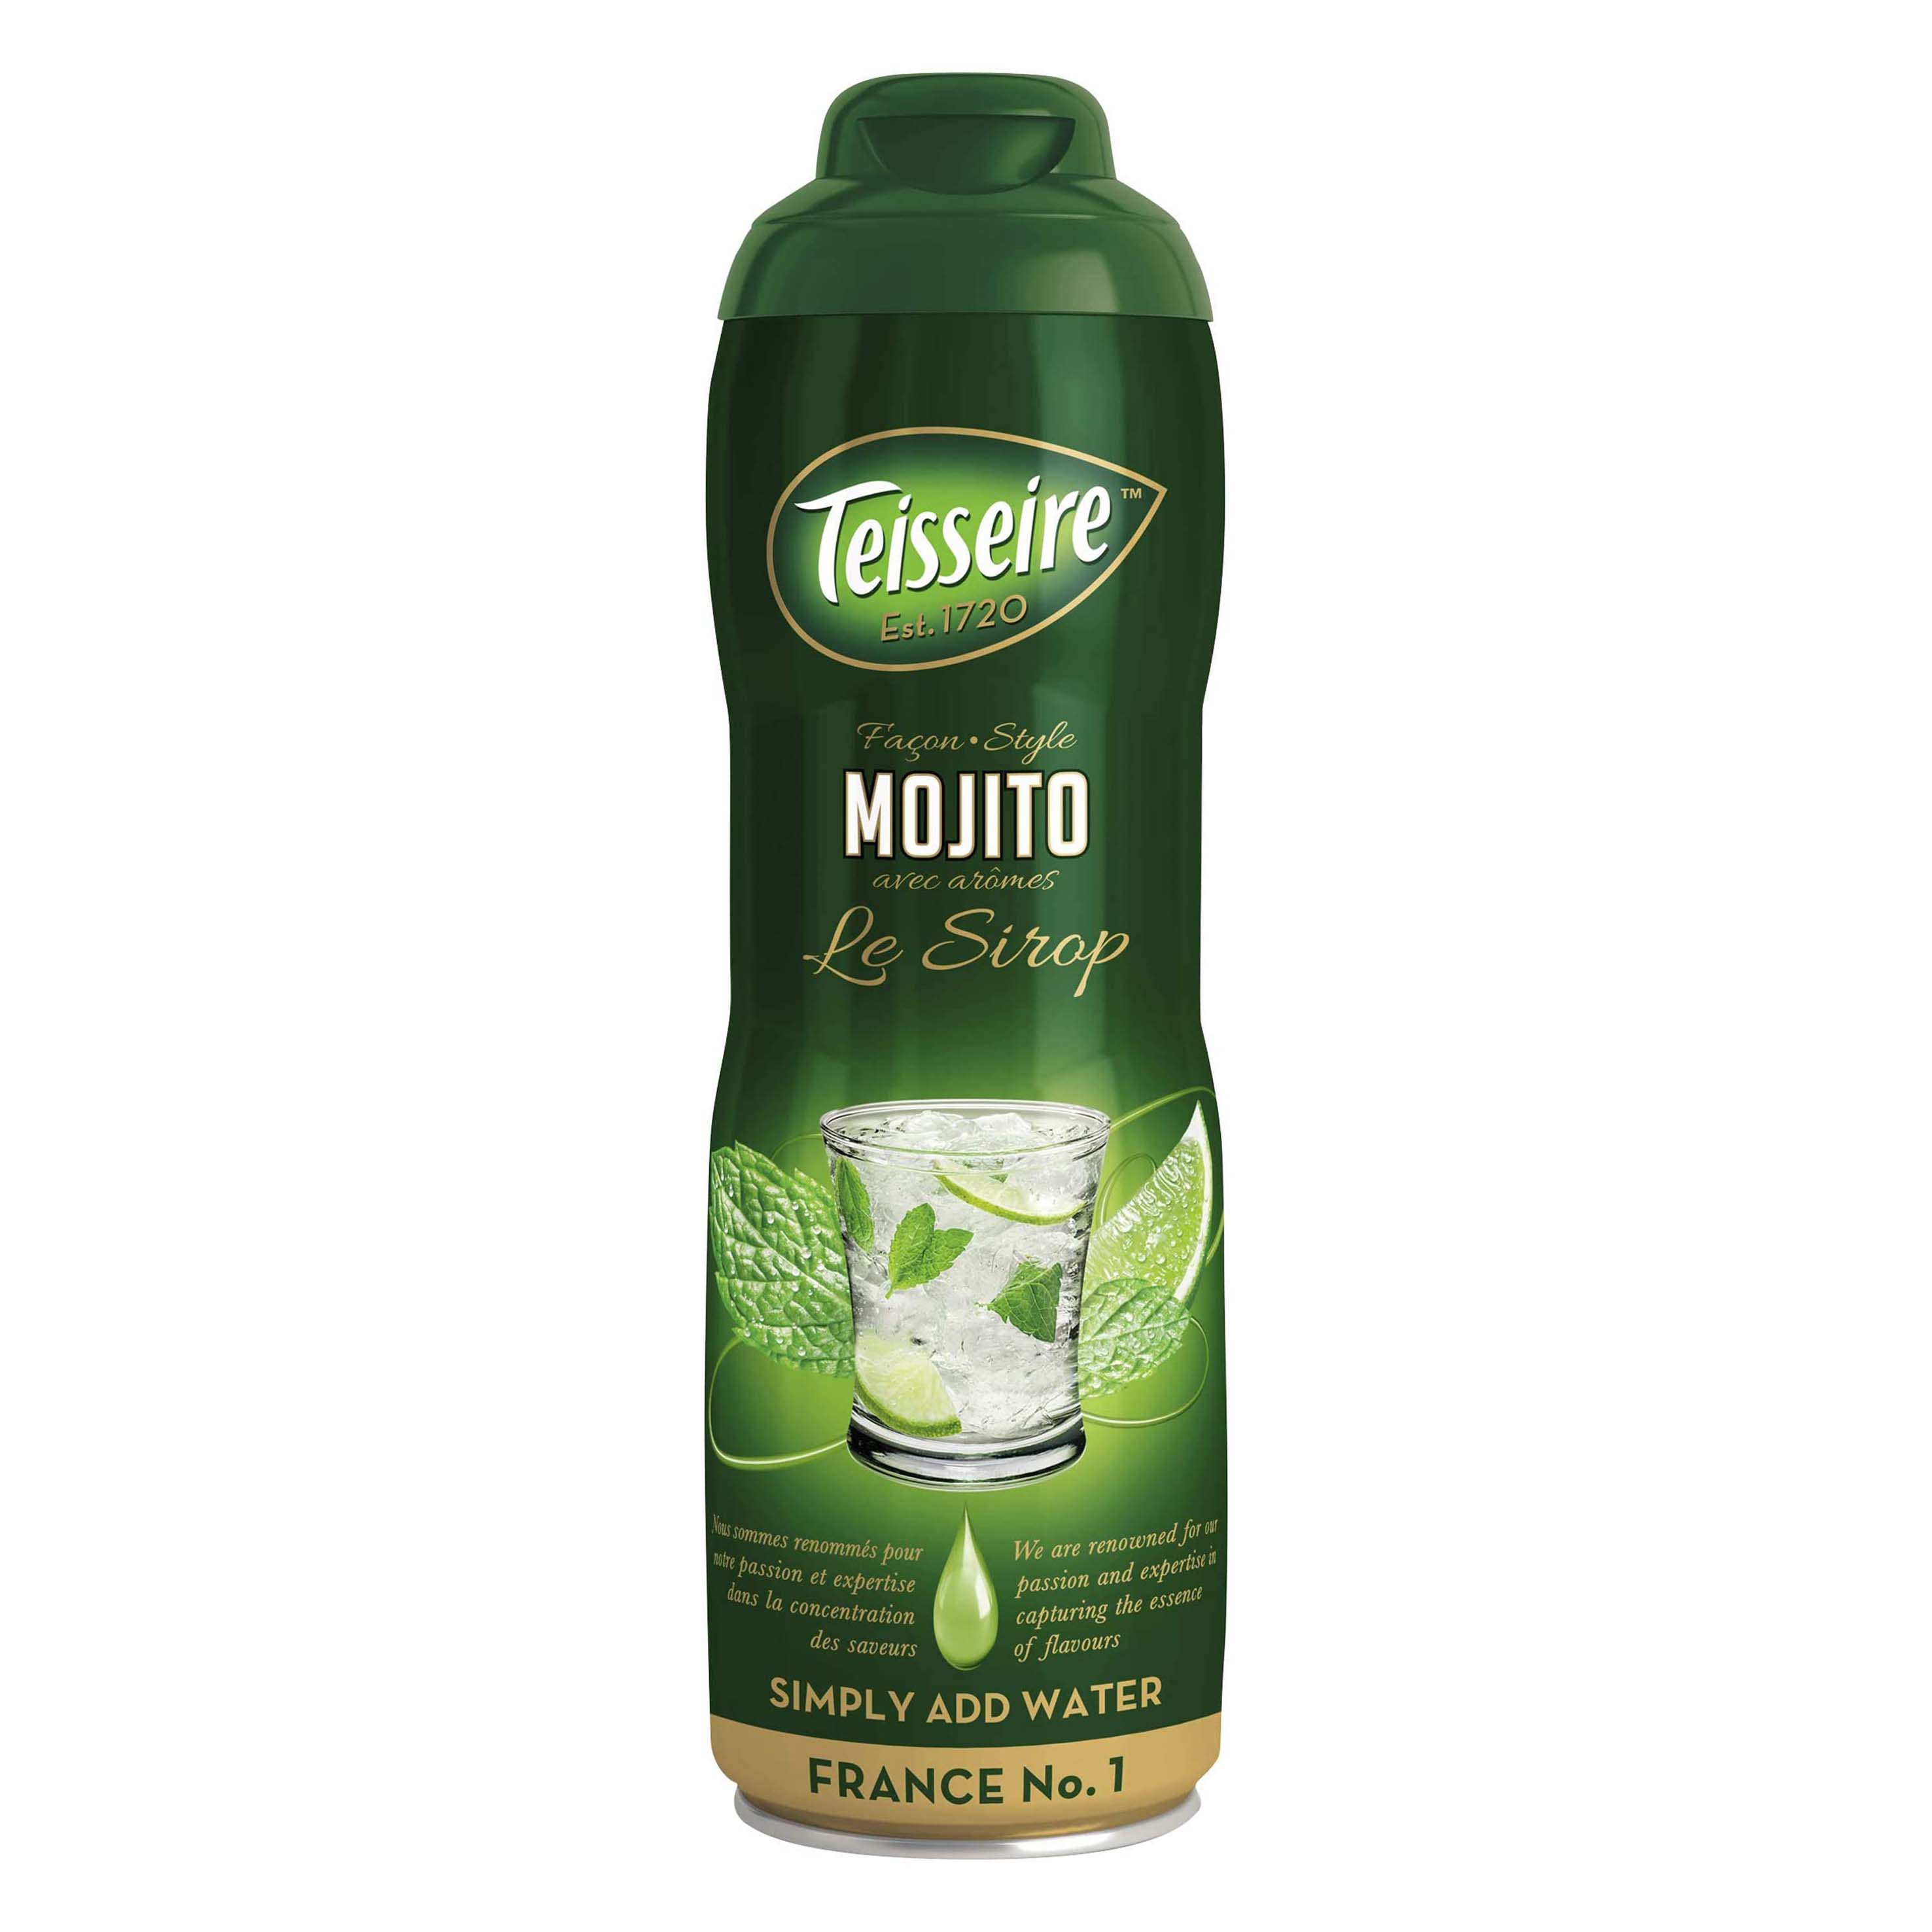 Teisseire sirop mojito 60 cl.